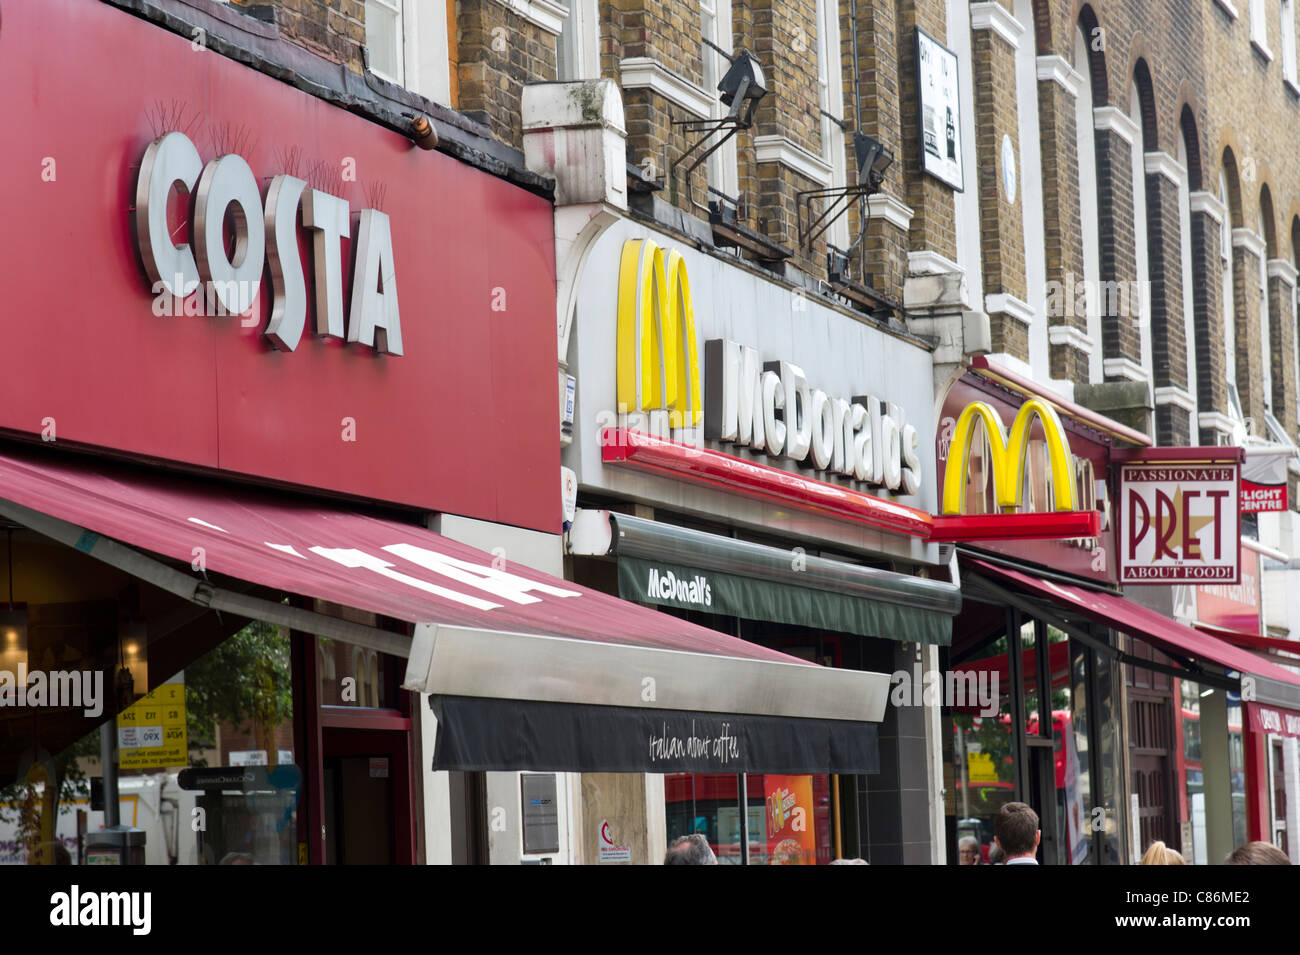 Row of fast food takeaways and coffee bar chains, London, England, UK Stock Photo